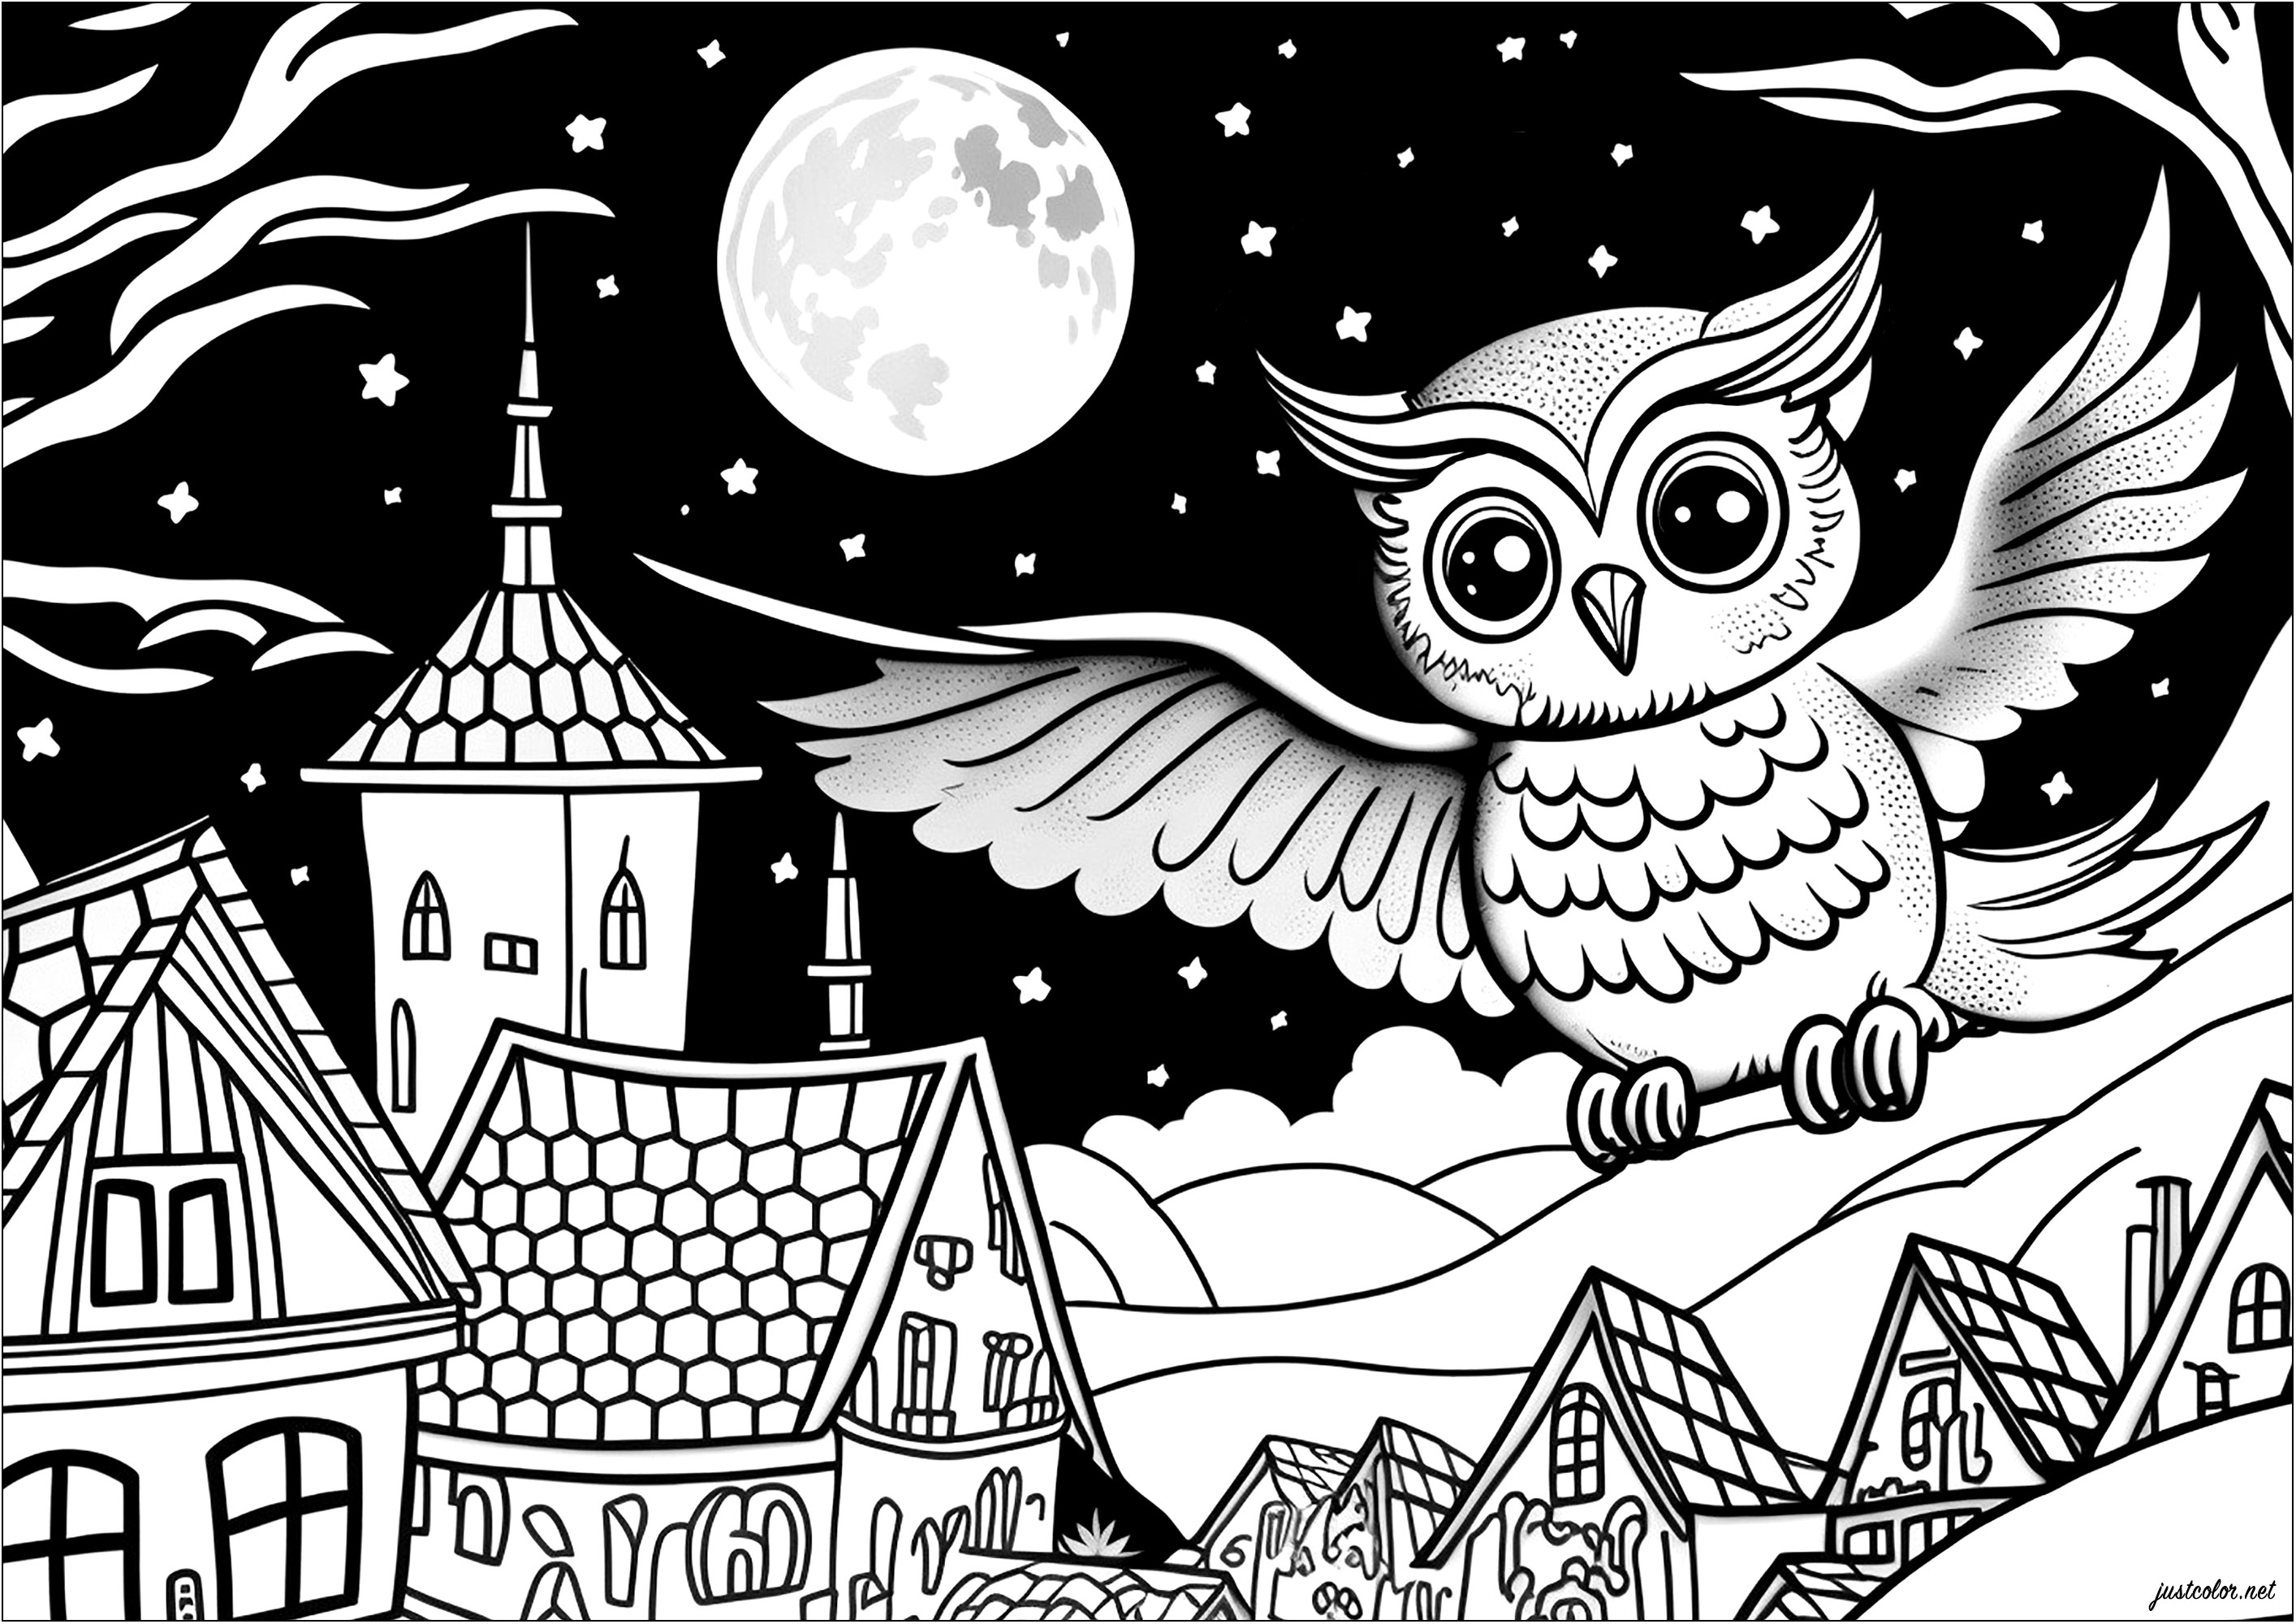 Coloring of an owl above a pretty village. A beautiful calm and night atmosphere. Very fine details, it only lacks soft colors to complete this magnificent drawing.